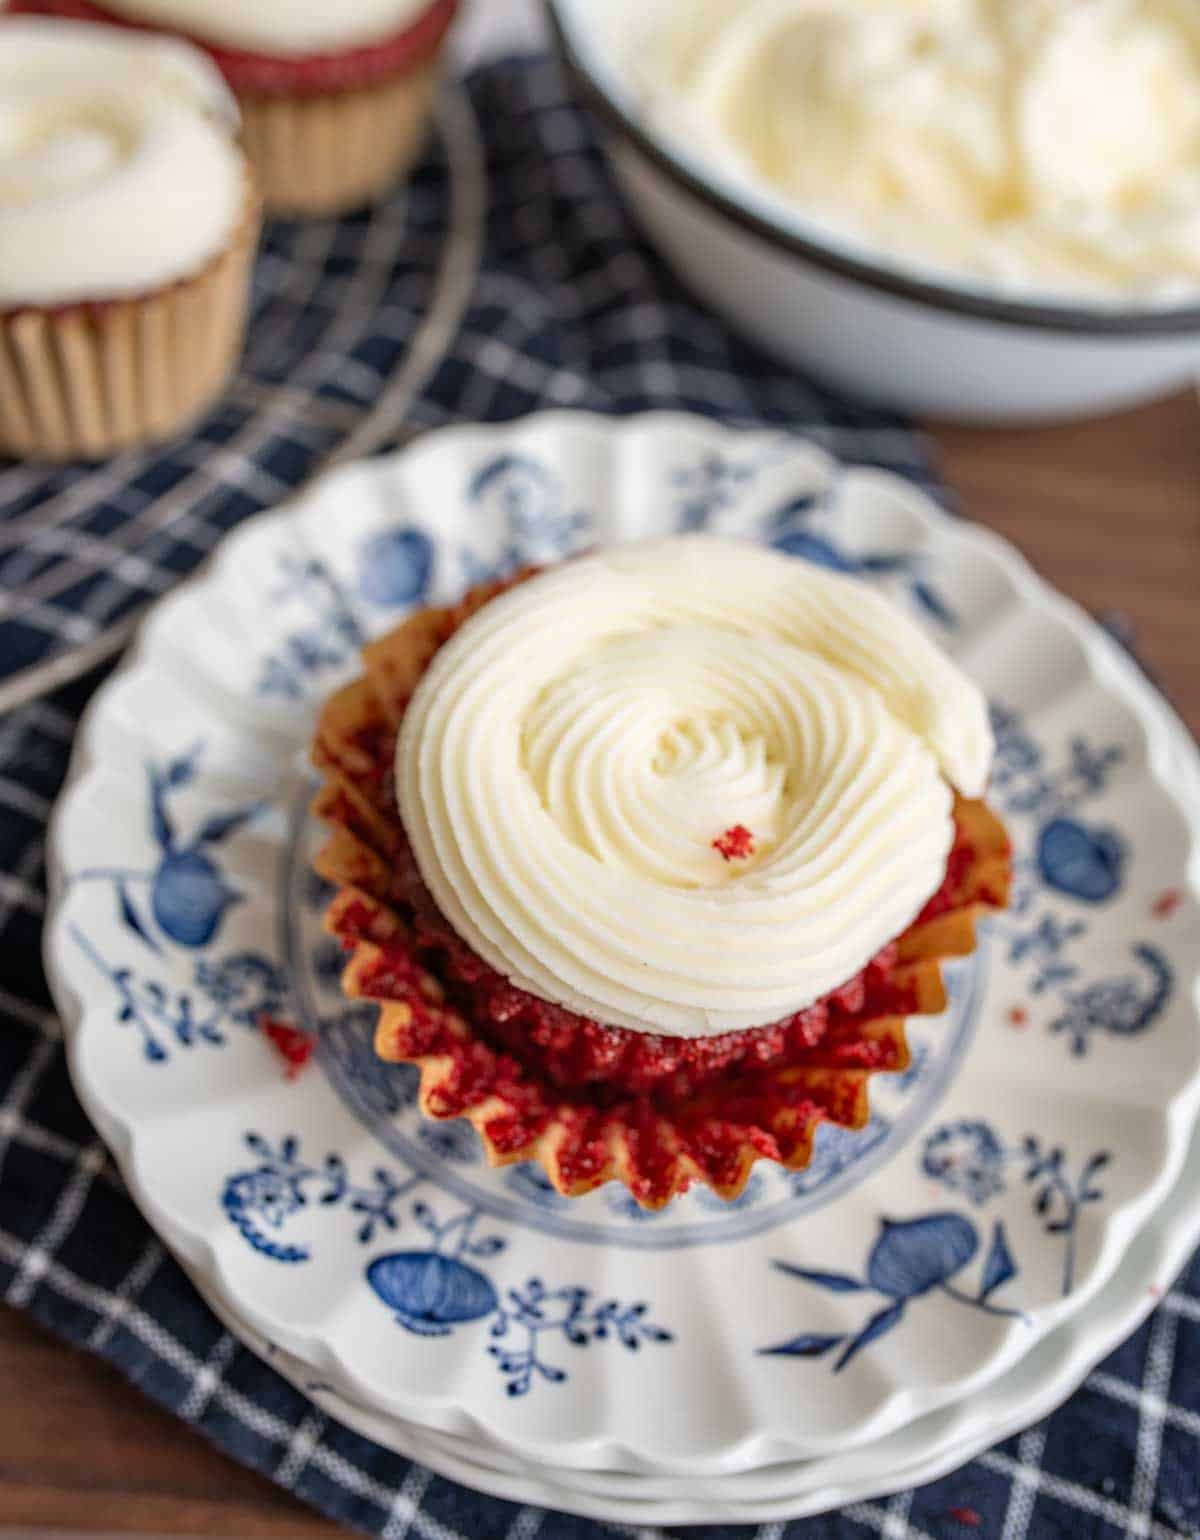 red velvet cupcake with cream cheese frosting on white and blue plate